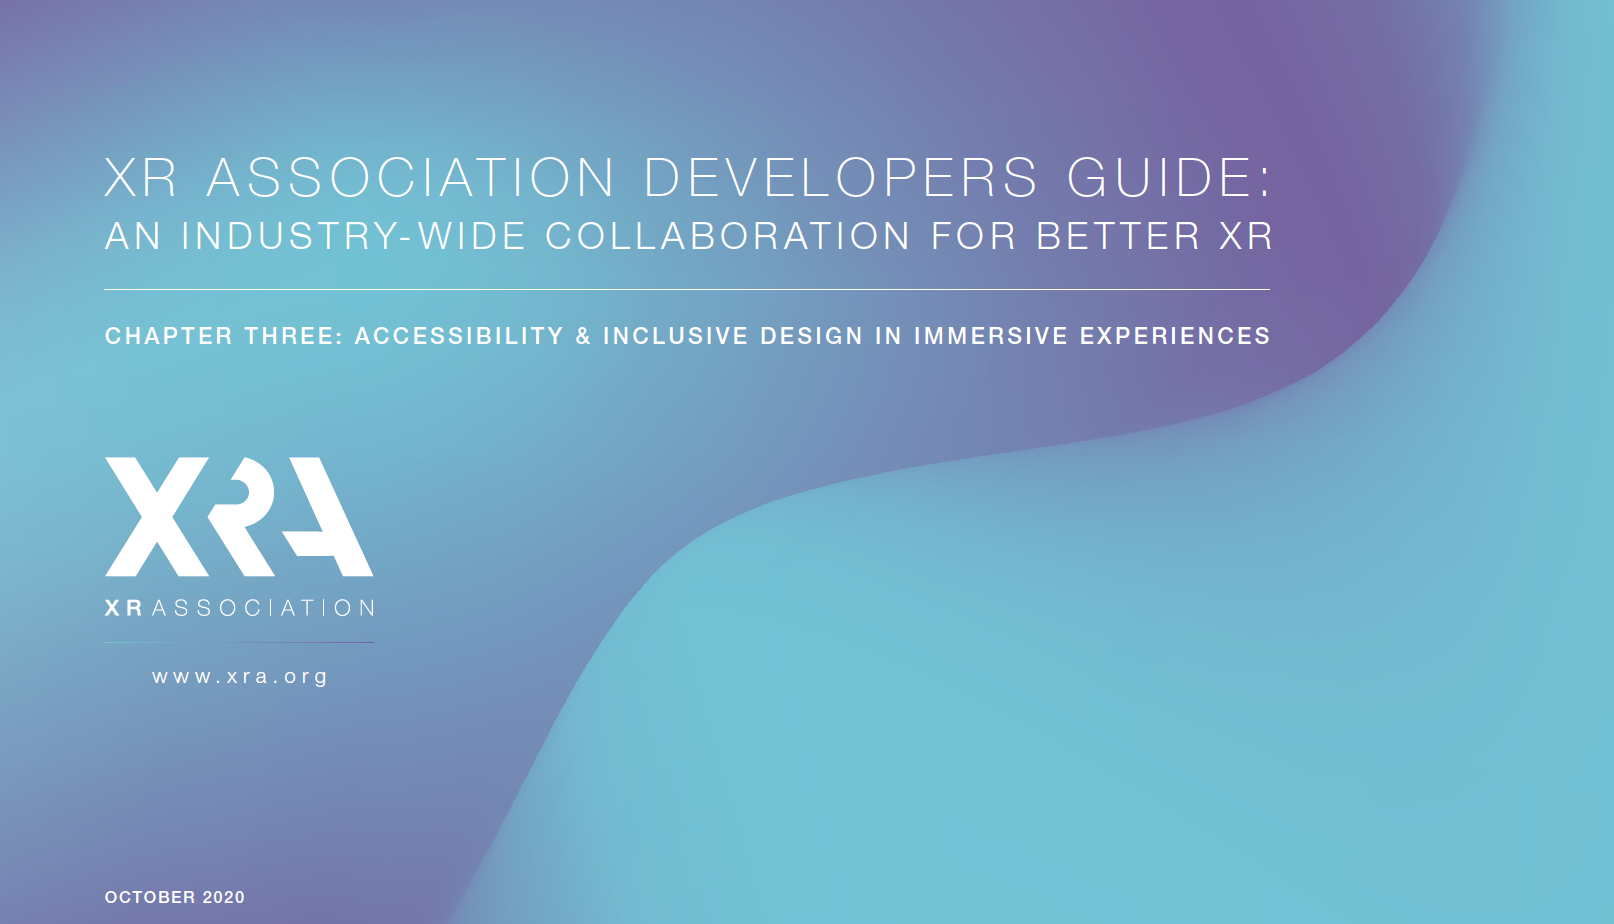 XR ASSOCIATION RELEASES UPDATE TO DEVELOPERS GUIDE FOCUSED ON ACCESSIBILITY